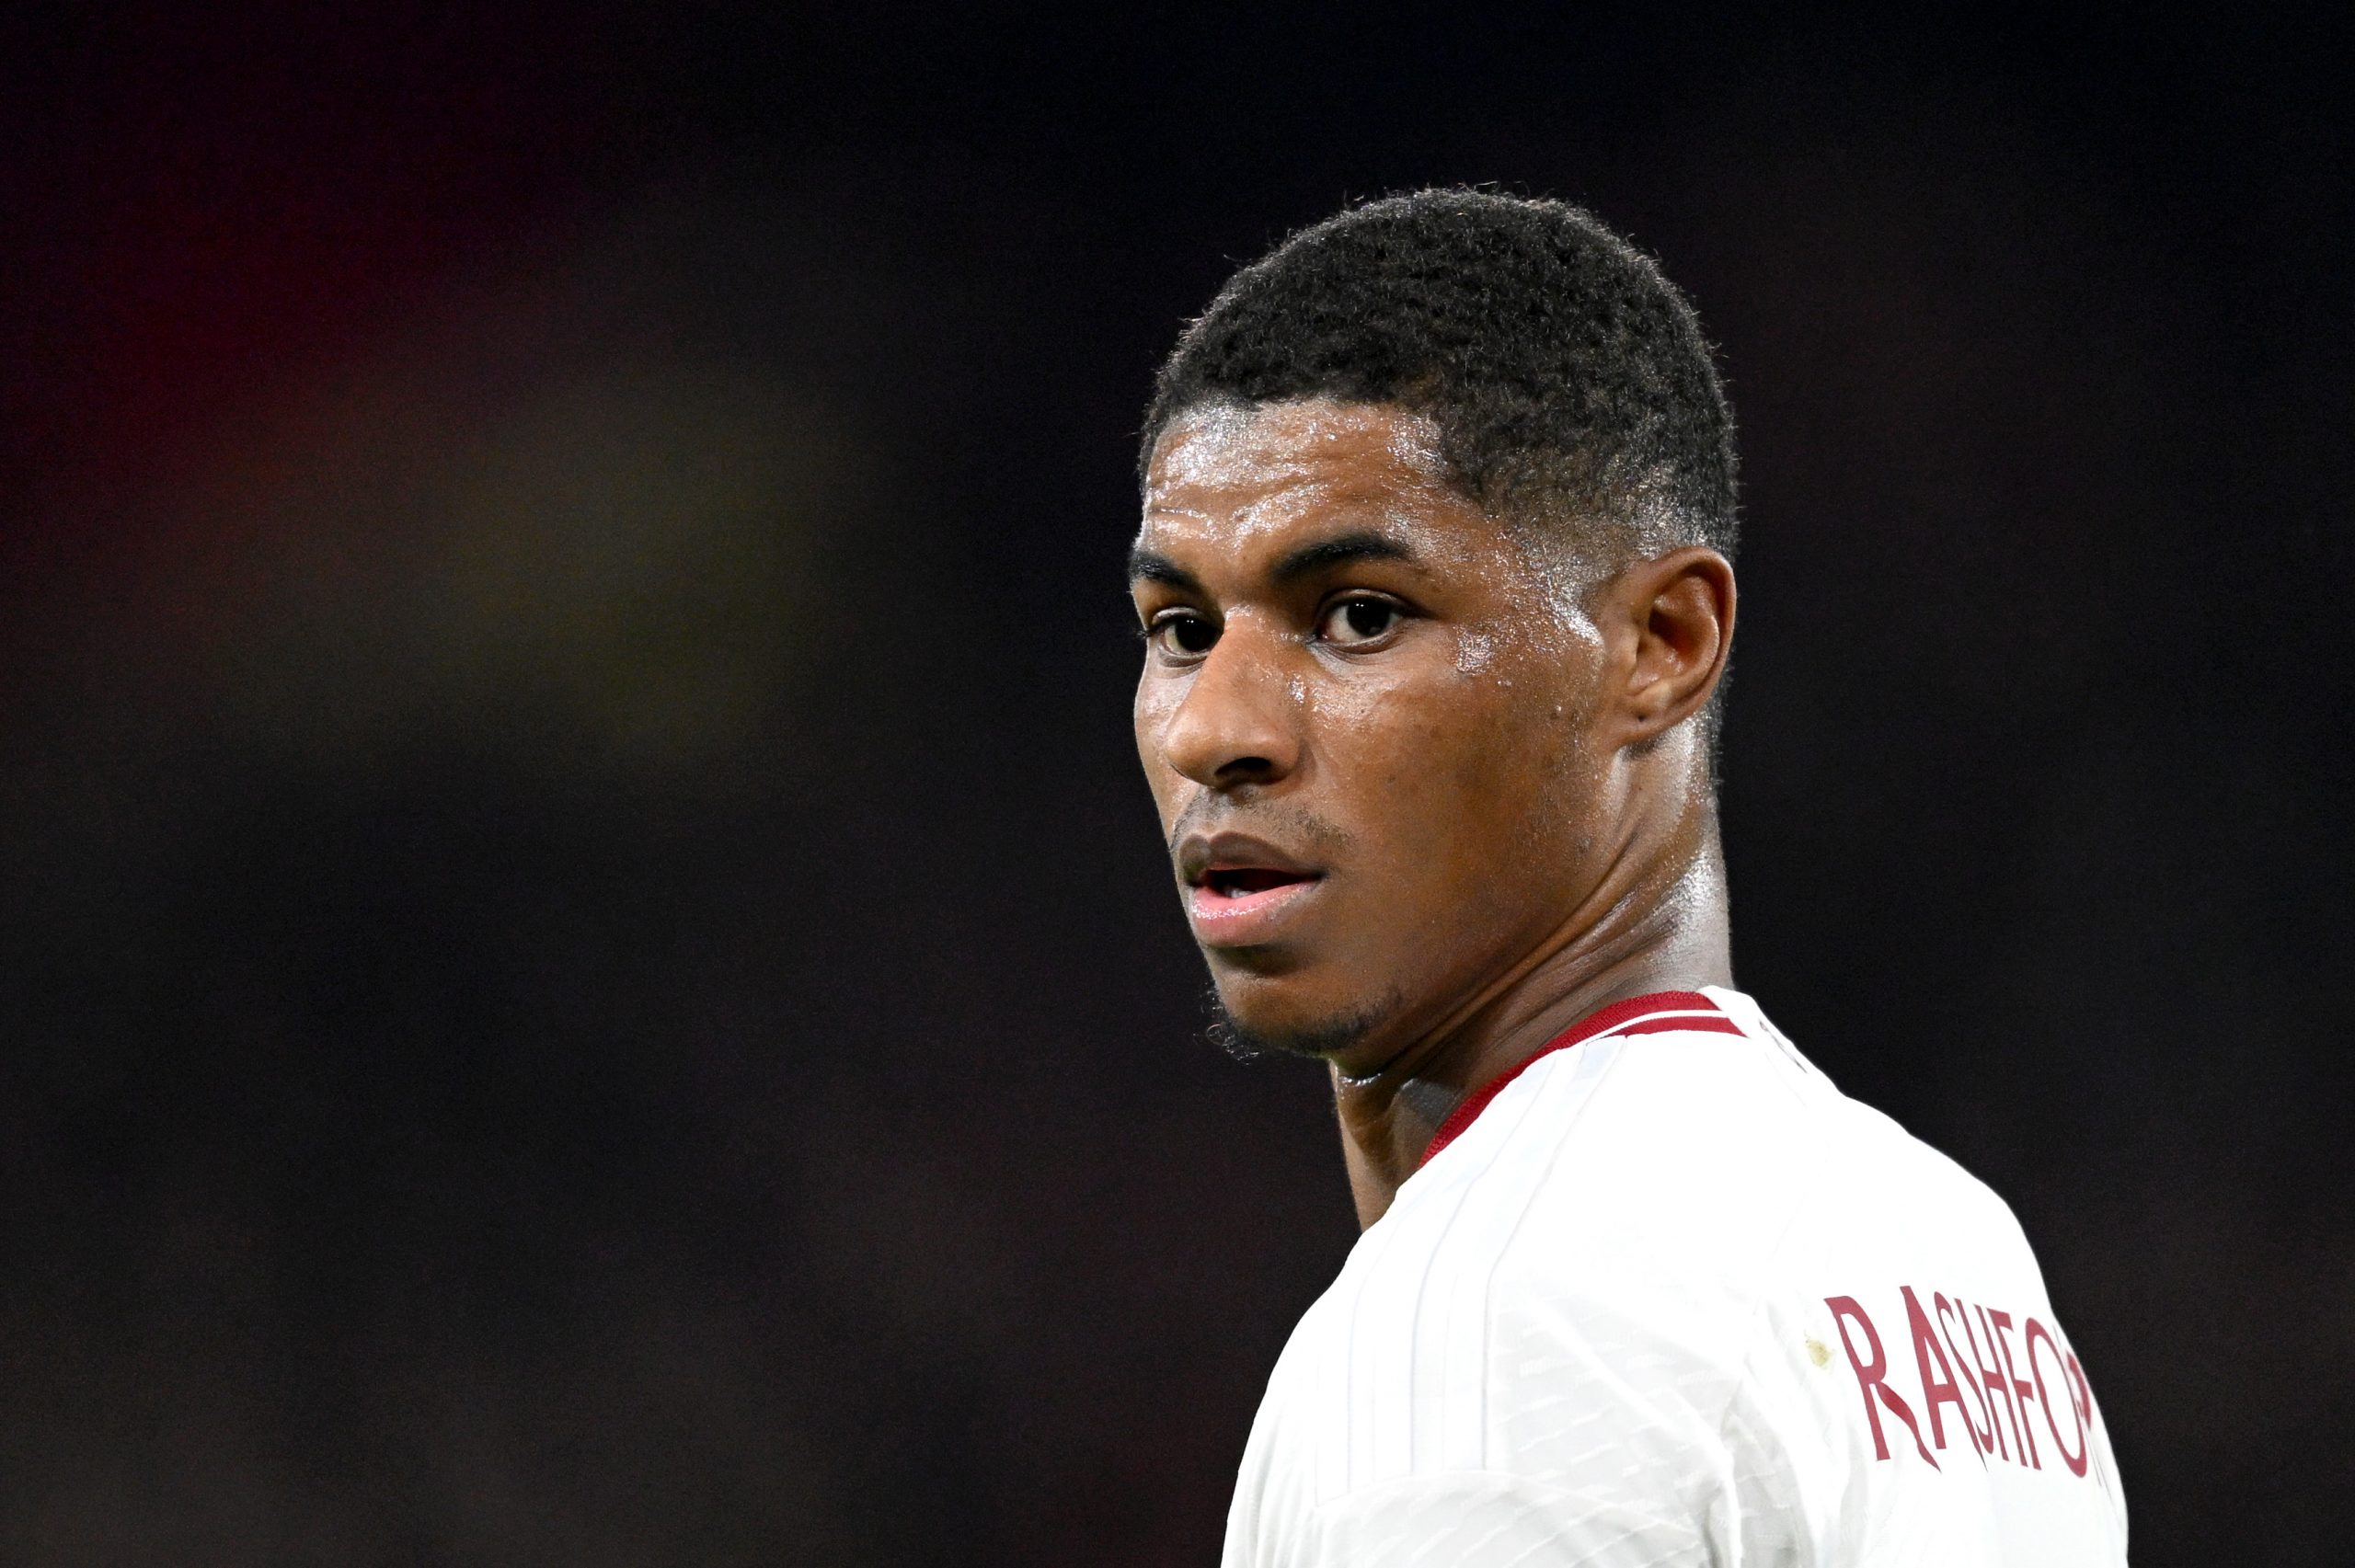 Marcus Rashford reacts to being left out of England's squad for the EUROs